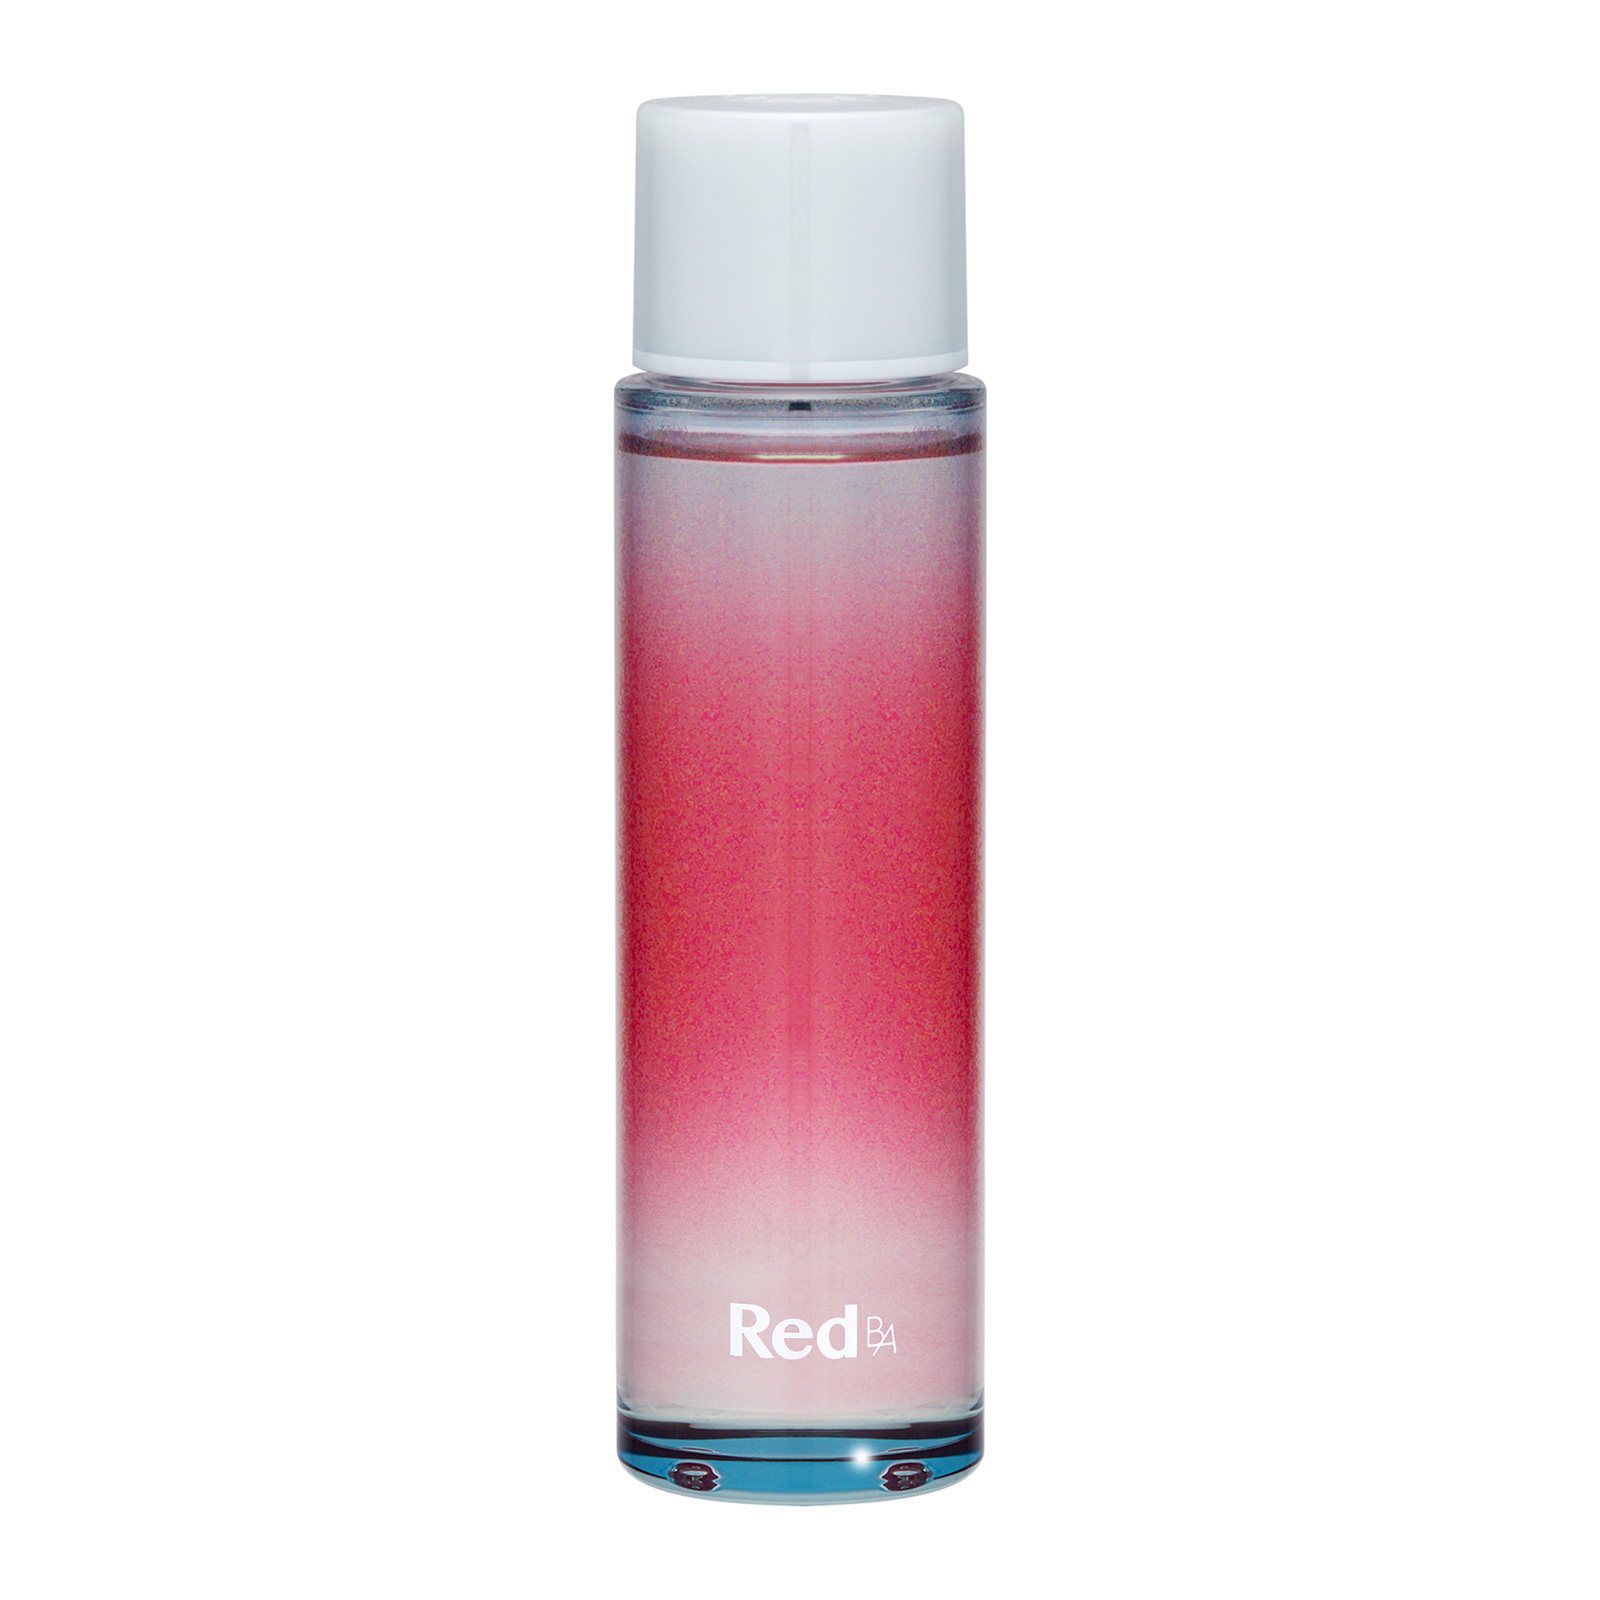 Red B.A Glow Line Oil